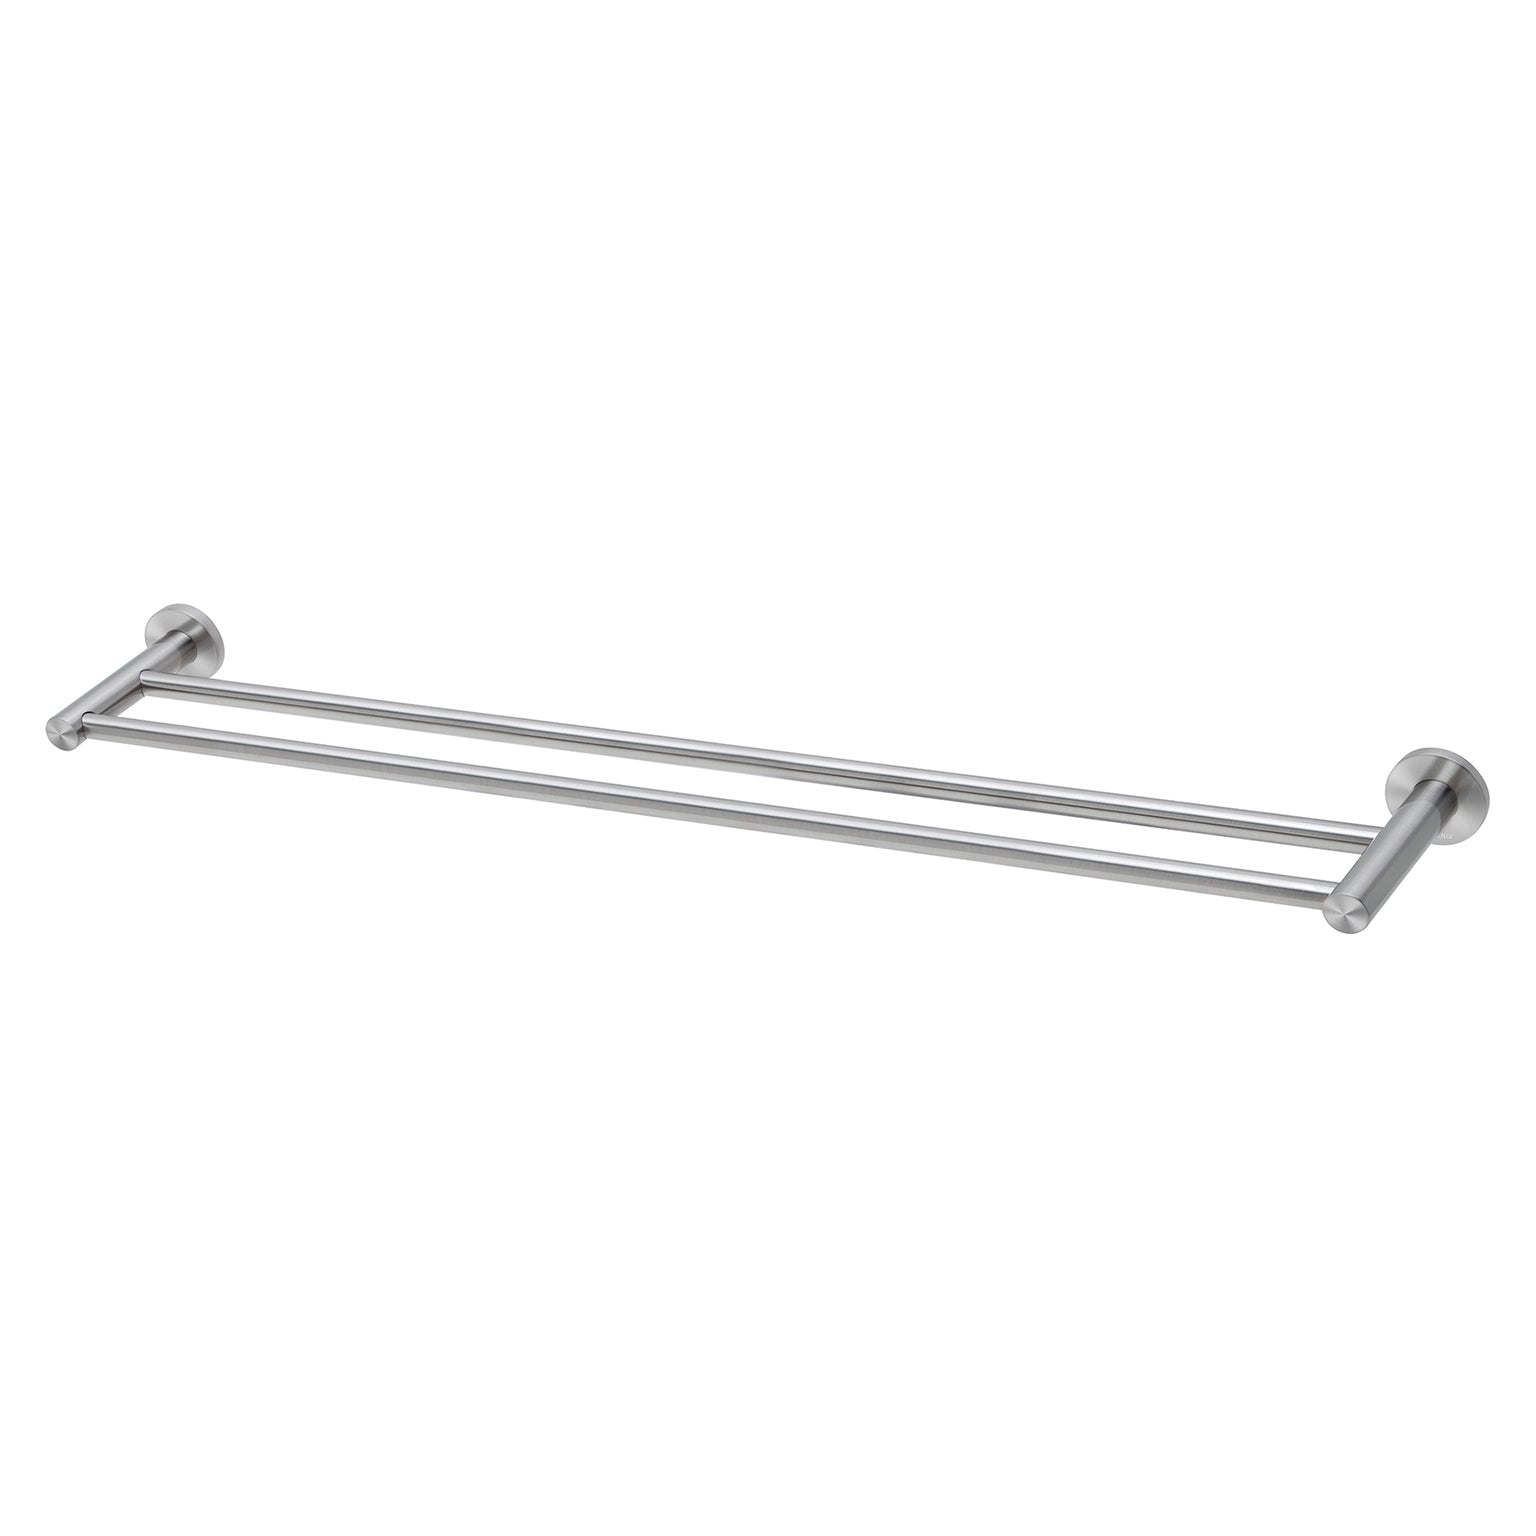 PHOENIX RADII SS 316 DOUBLE NON-HEATED TOWEL RAIL ROUND PLATE STAINLESS STEEL 800MM